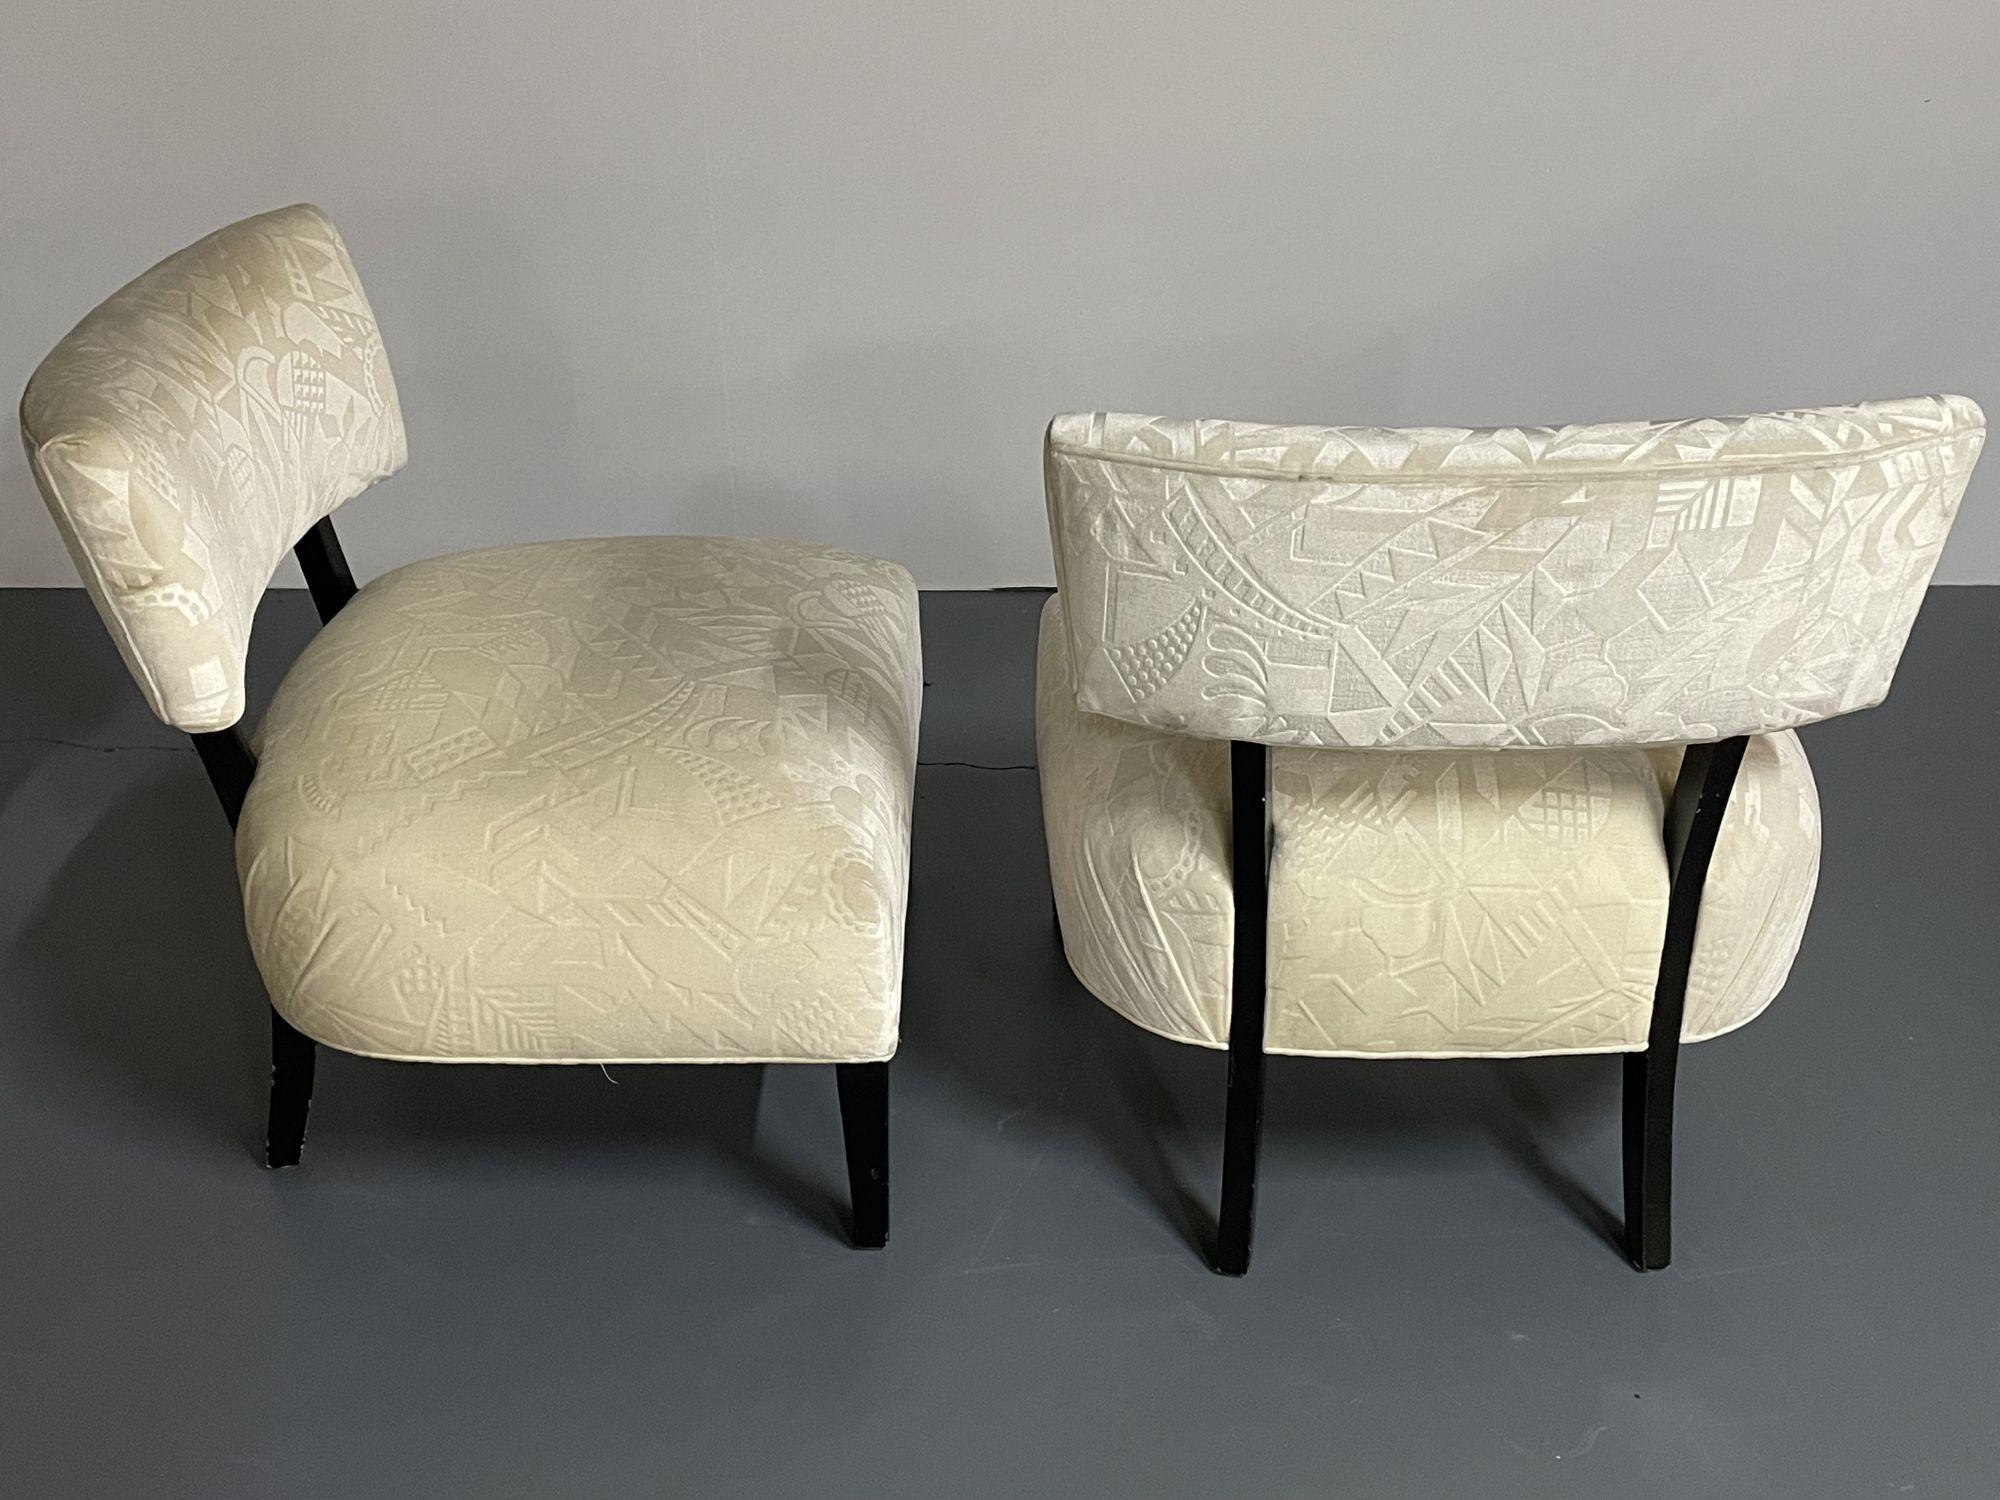 Pair Mid-Century Modern Organic Form Harvey Probber Style Lounge / Slipper Chair In Good Condition For Sale In Stamford, CT